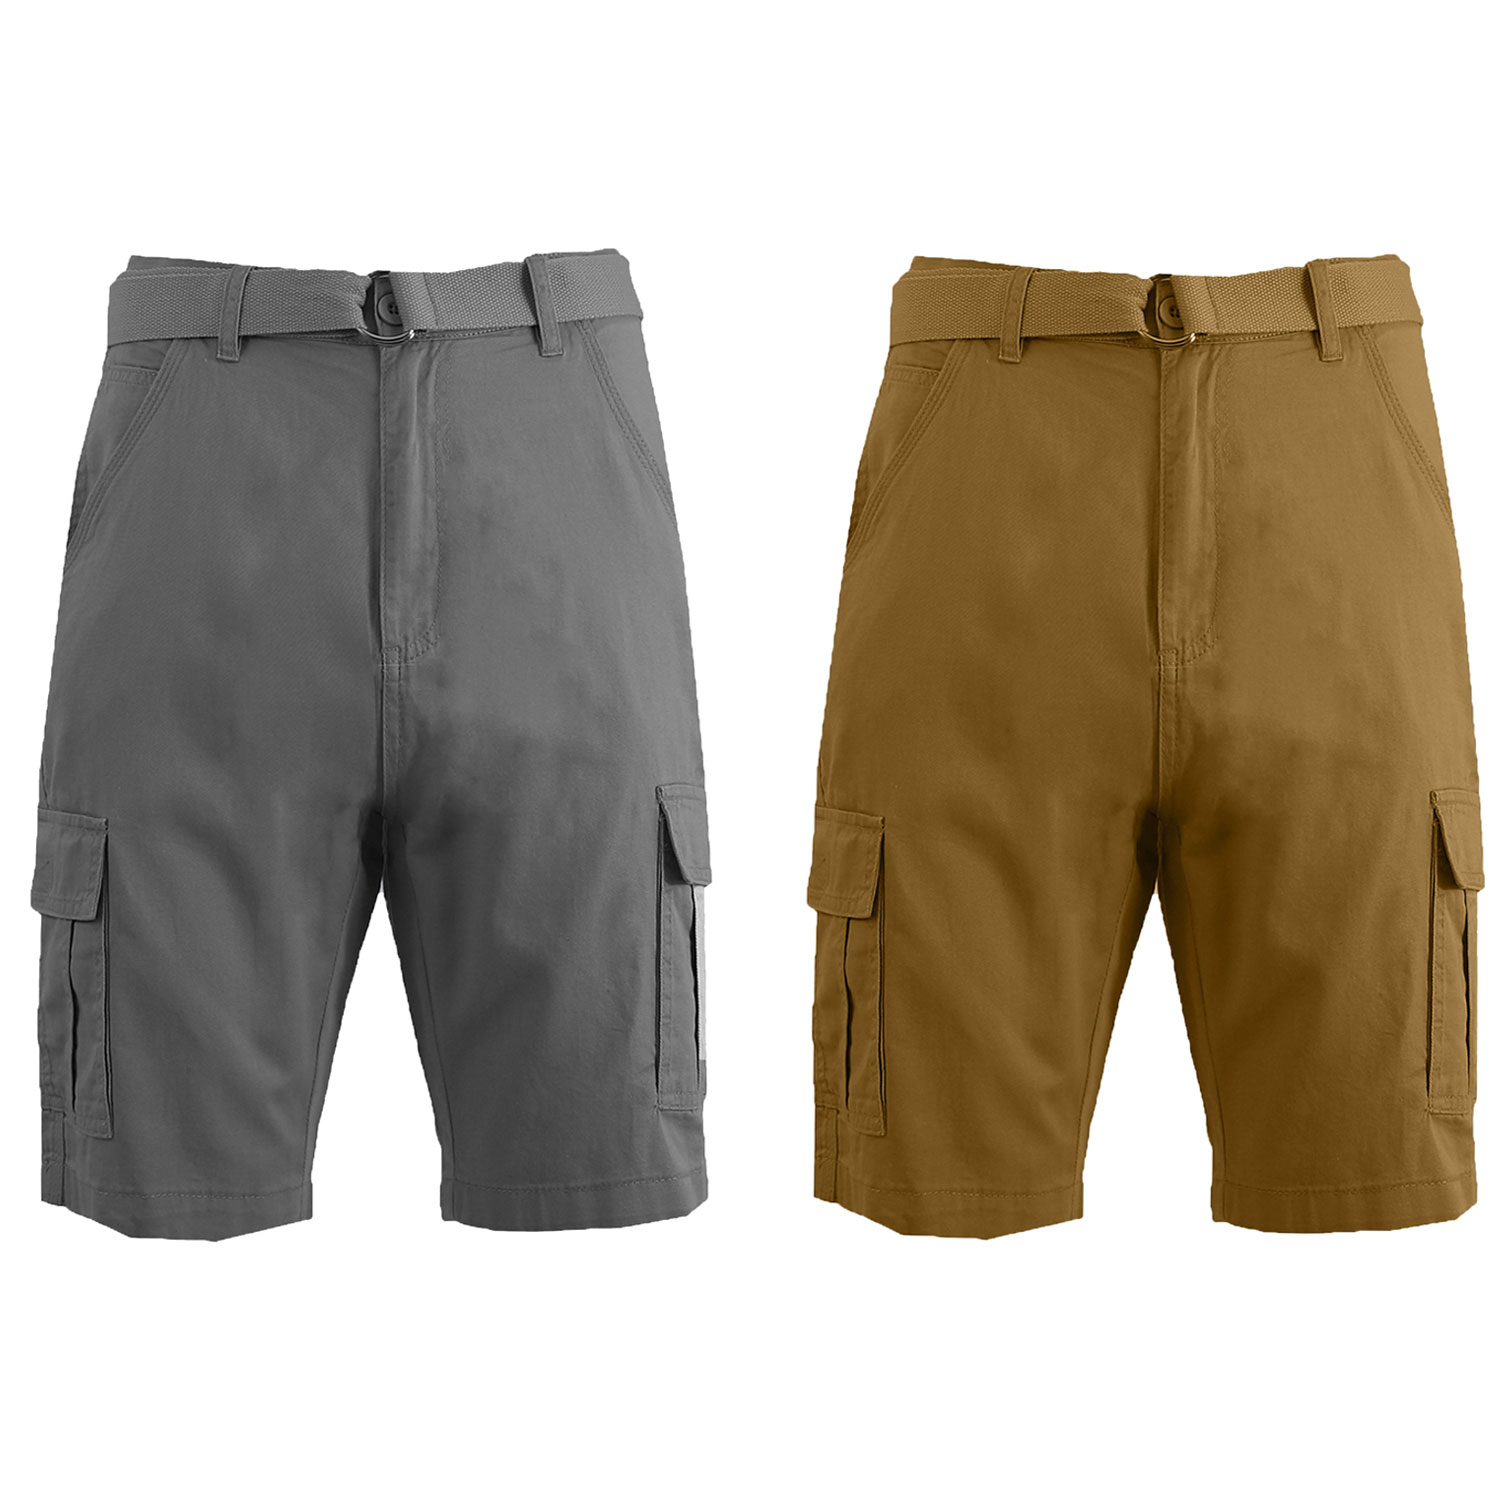 2 Pack Men's Cotton Chino Shorts With Belt